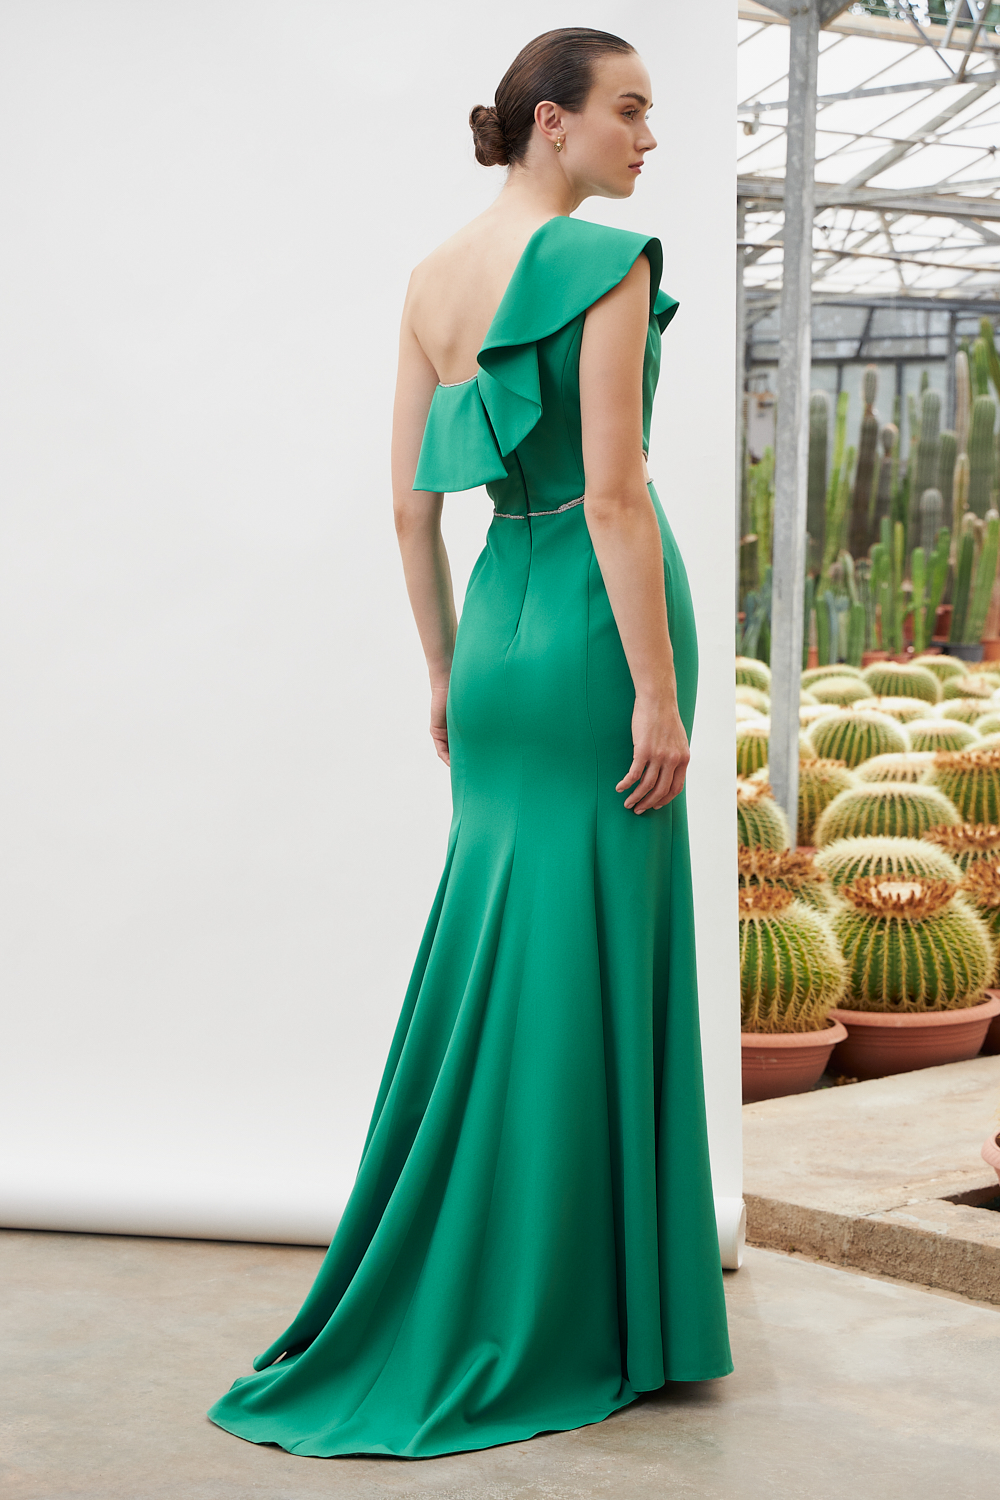 Cocktail Dresses / One shoulder cocktail satin dress with beading at the top and the waist